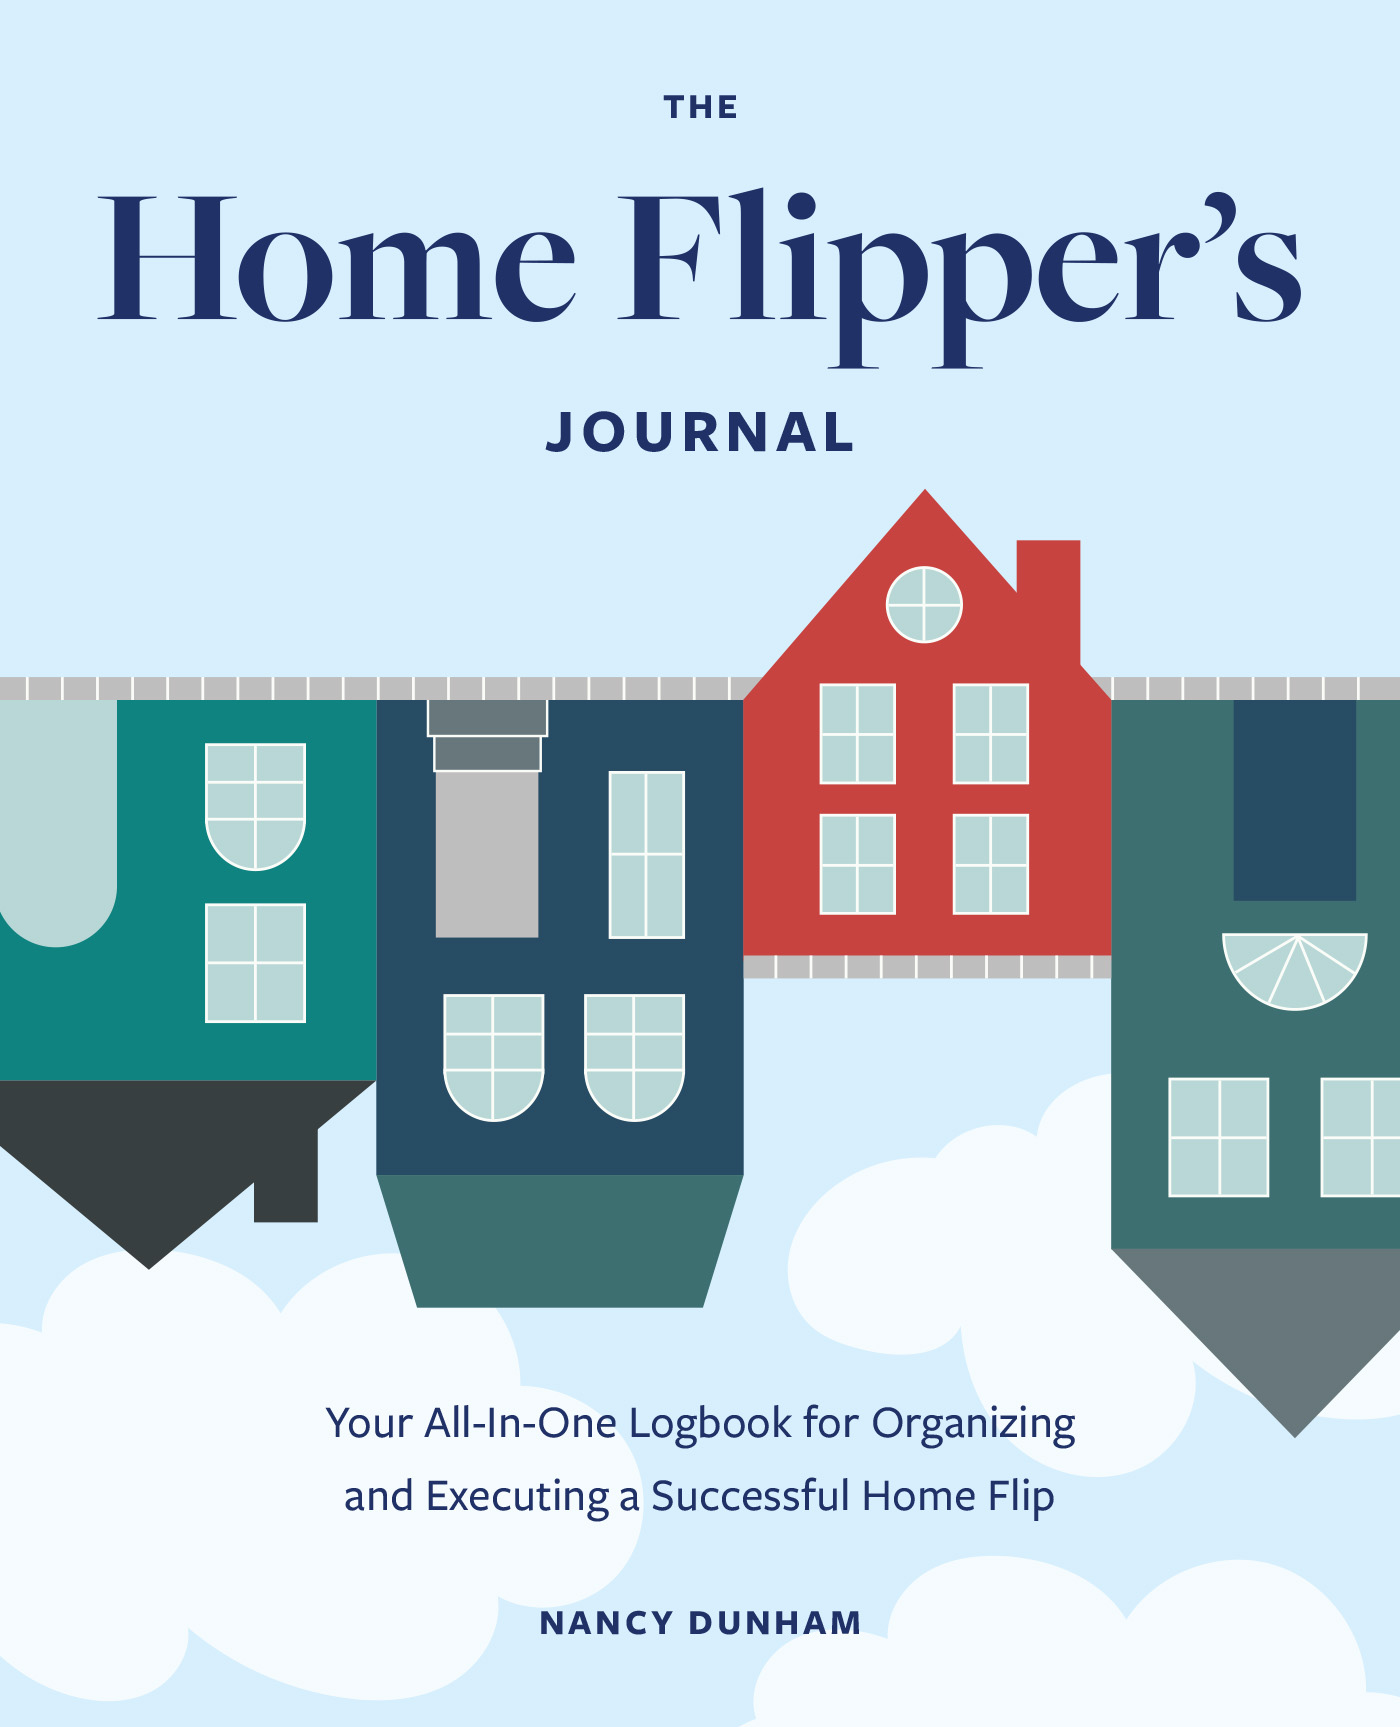 Home Flippers Journal-front.indd